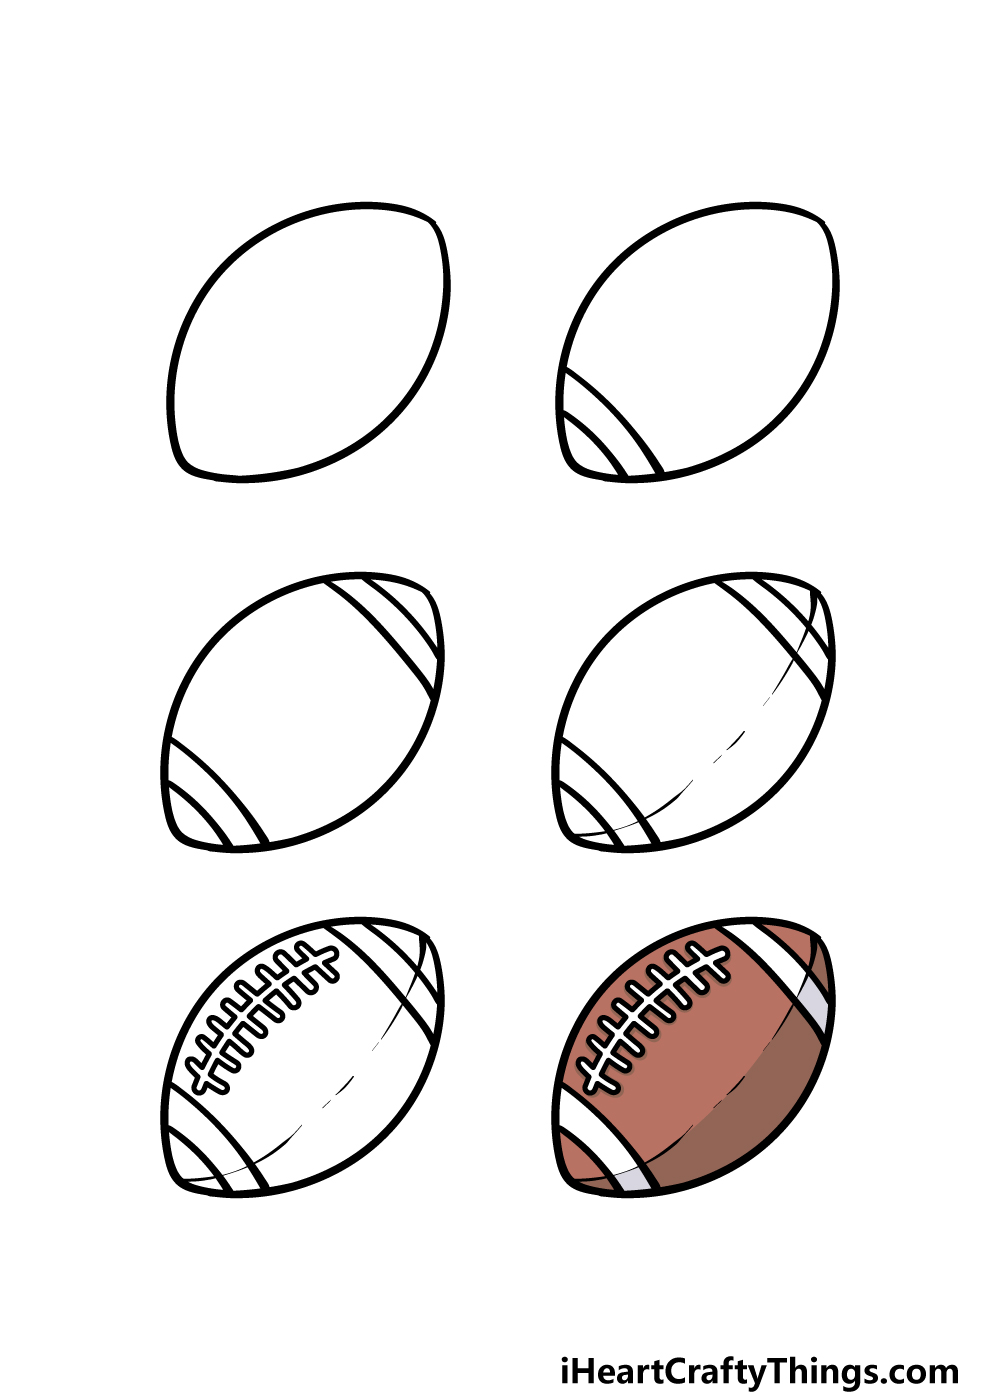 how to draw a cartoon football in 6 steps